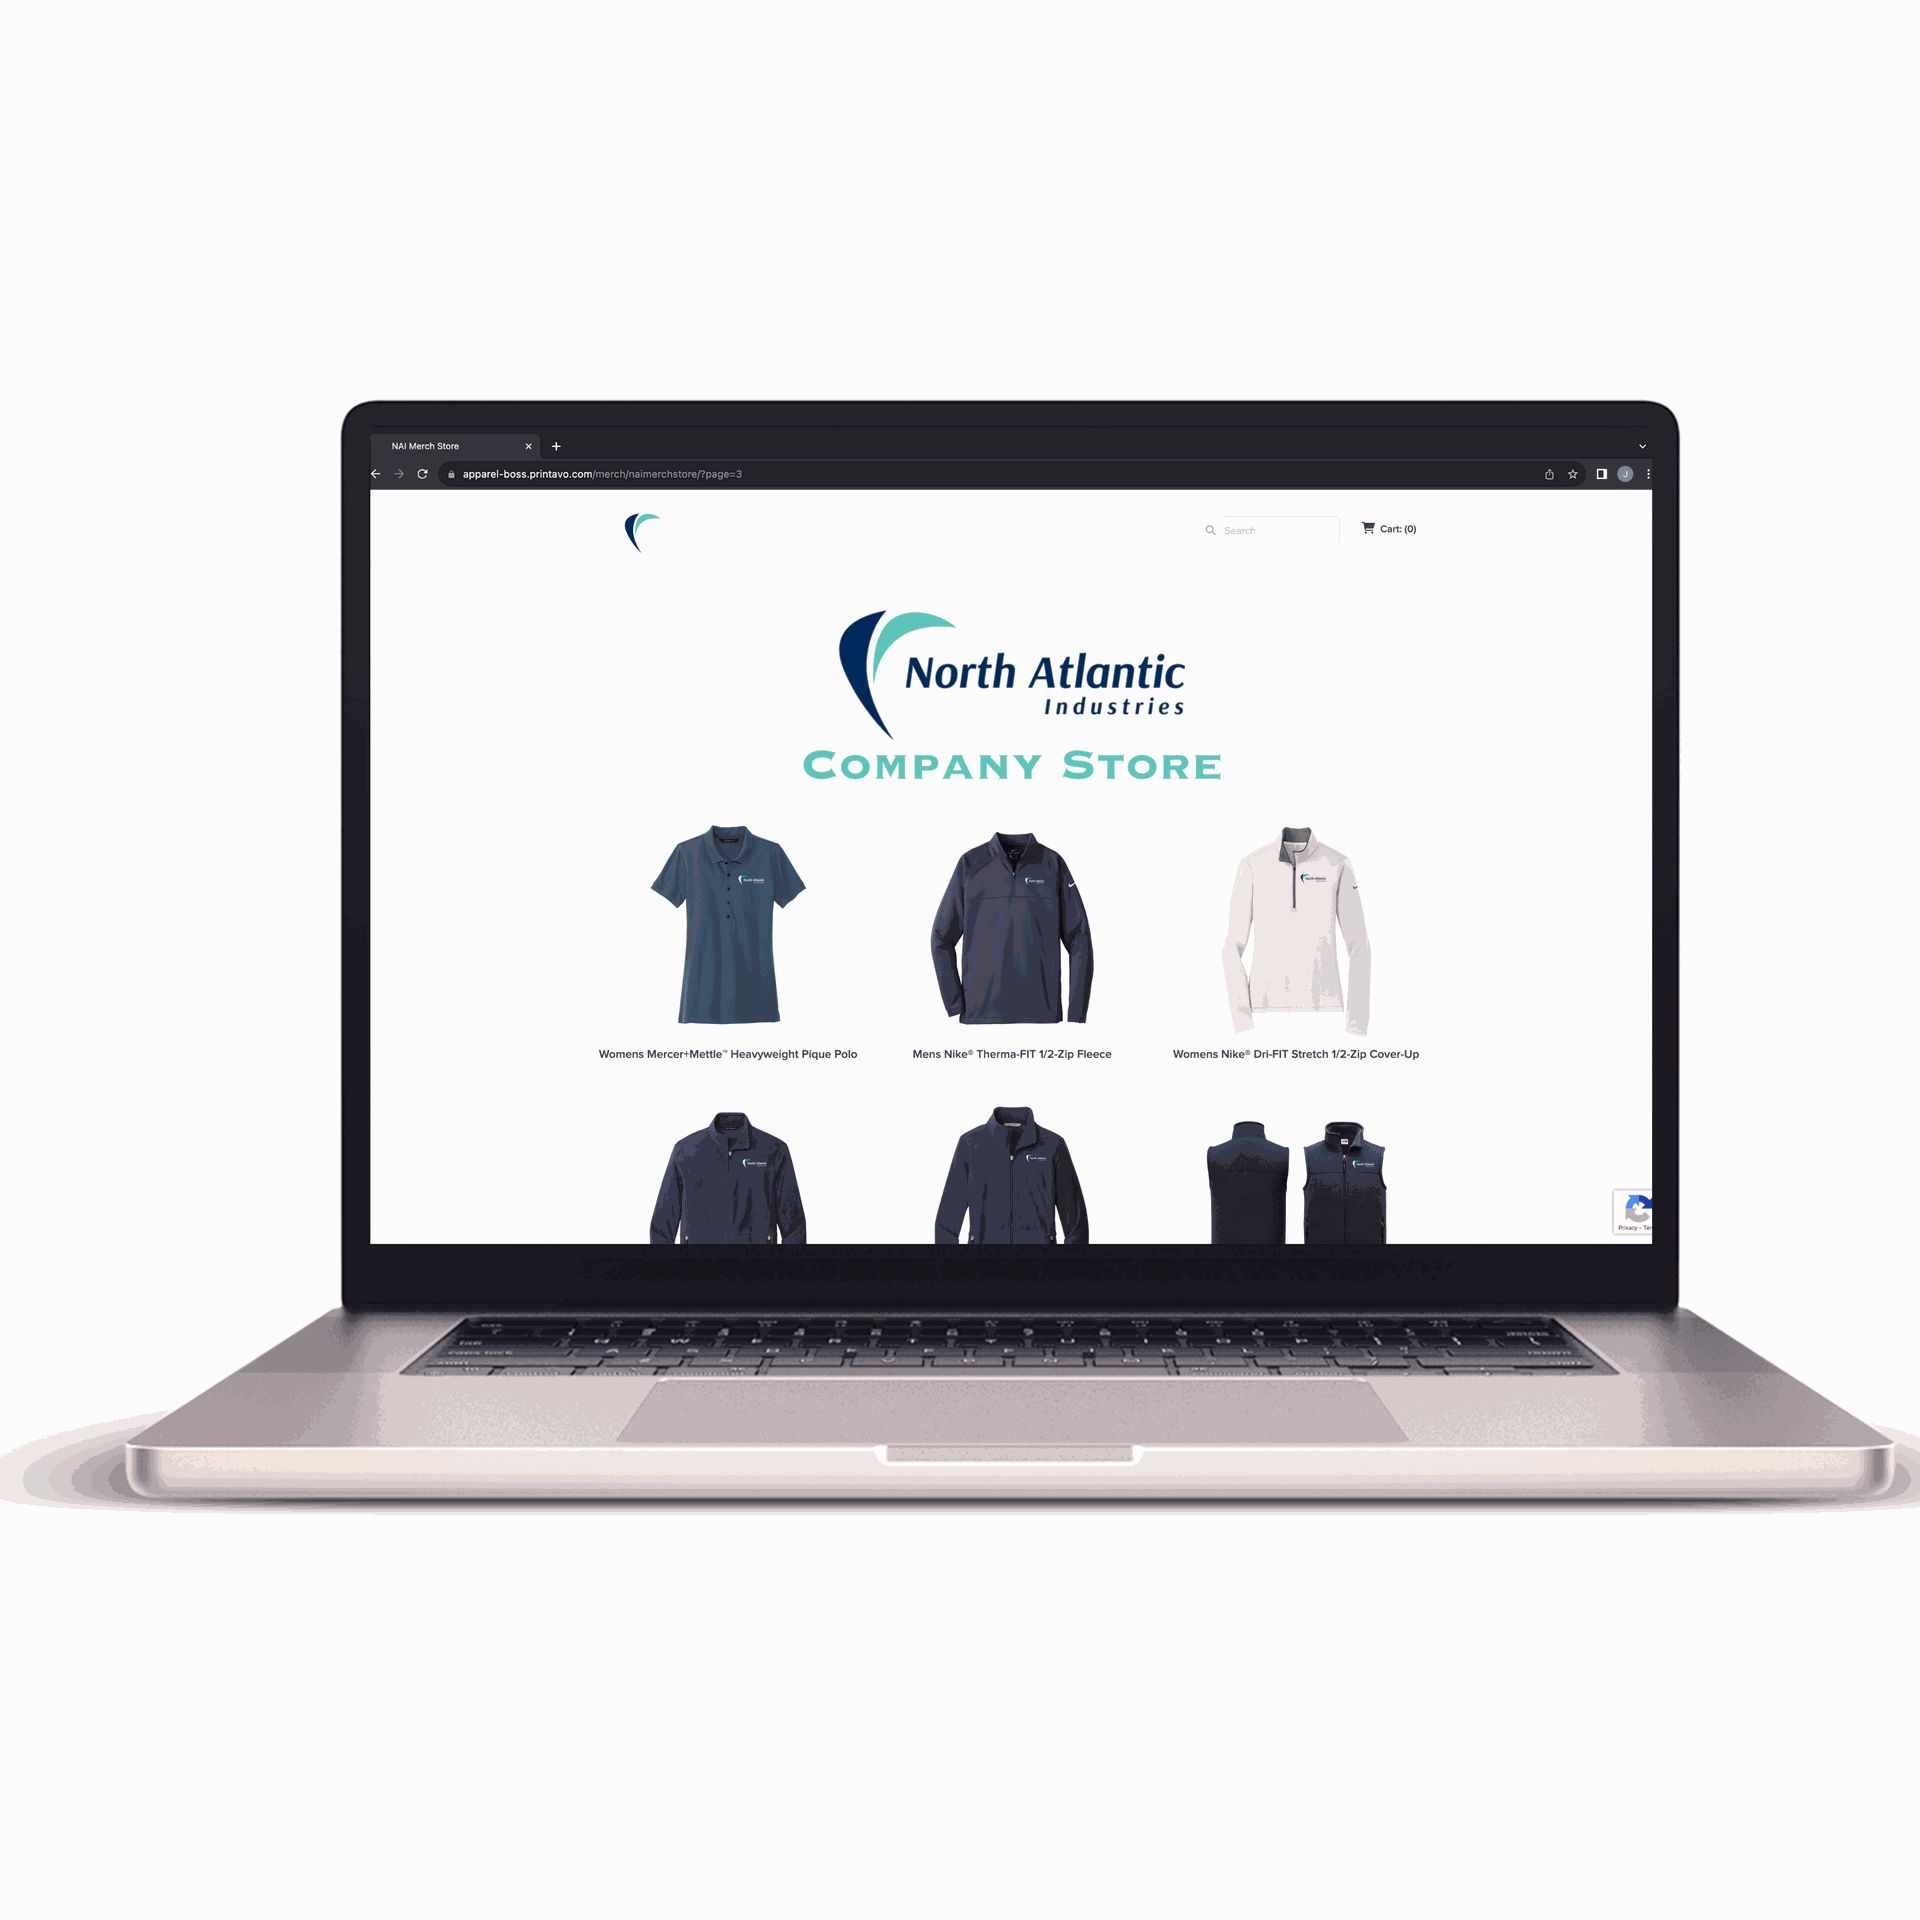 Laptop screen displaying the North Atlantic Industries Company Store webpage. Featured are a selection of branded corporate apparel, including polo shirts, thermal zip fleeces, and jackets, showcasing the company’s commitment to professional and high-quality merchandise.